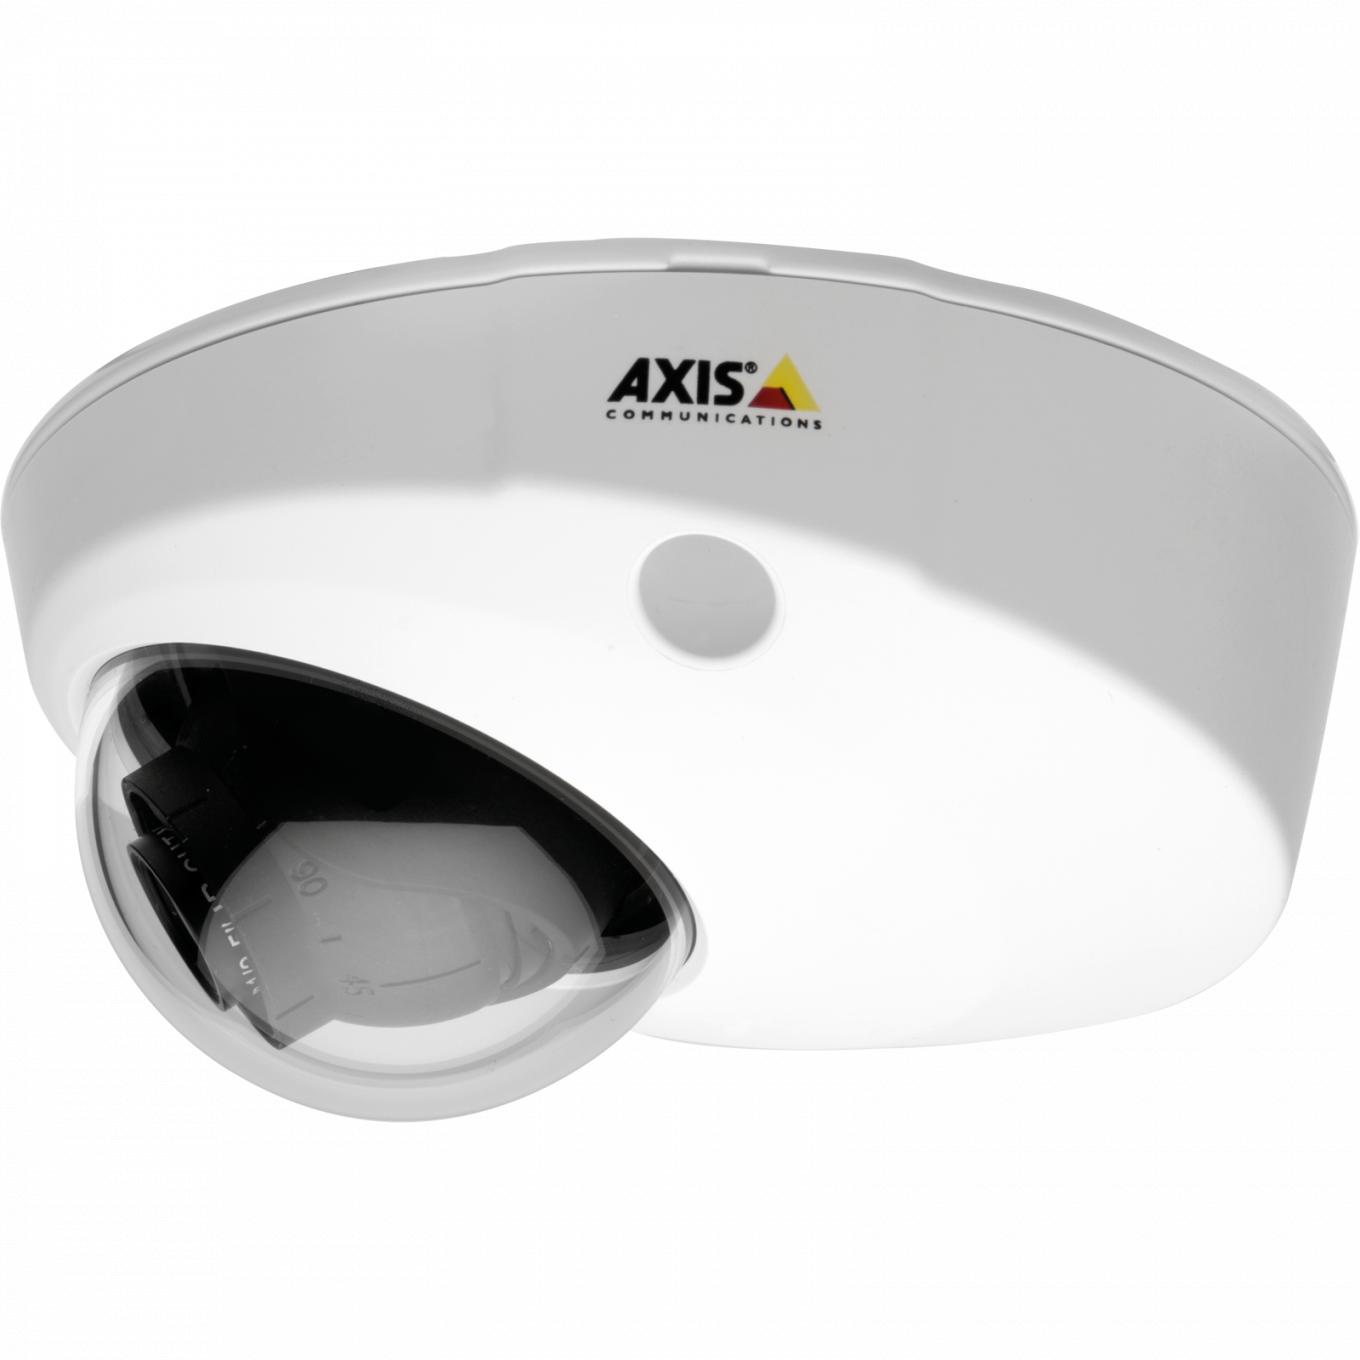 AXIS P3905-R Mk II Network Camera | Axis Communications